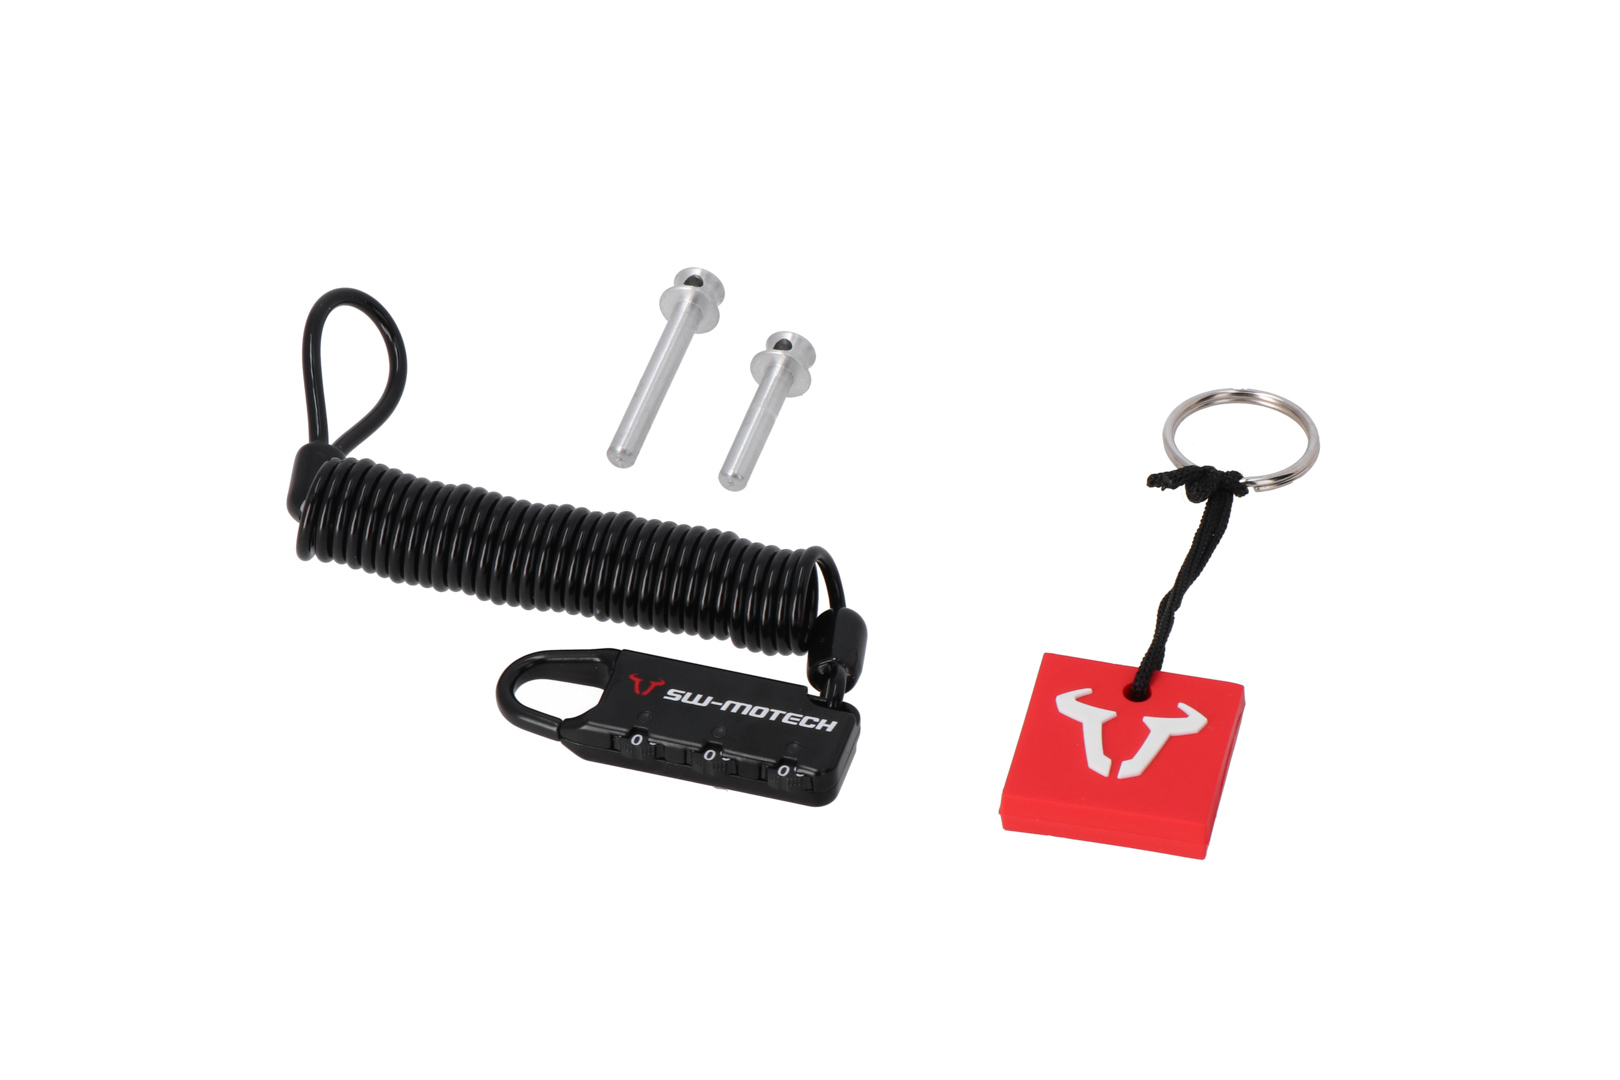 SW-Motech Anti-theft protection for PRO/ EVO tank bag - Security pin/motorbike luggage cable lock. unisex